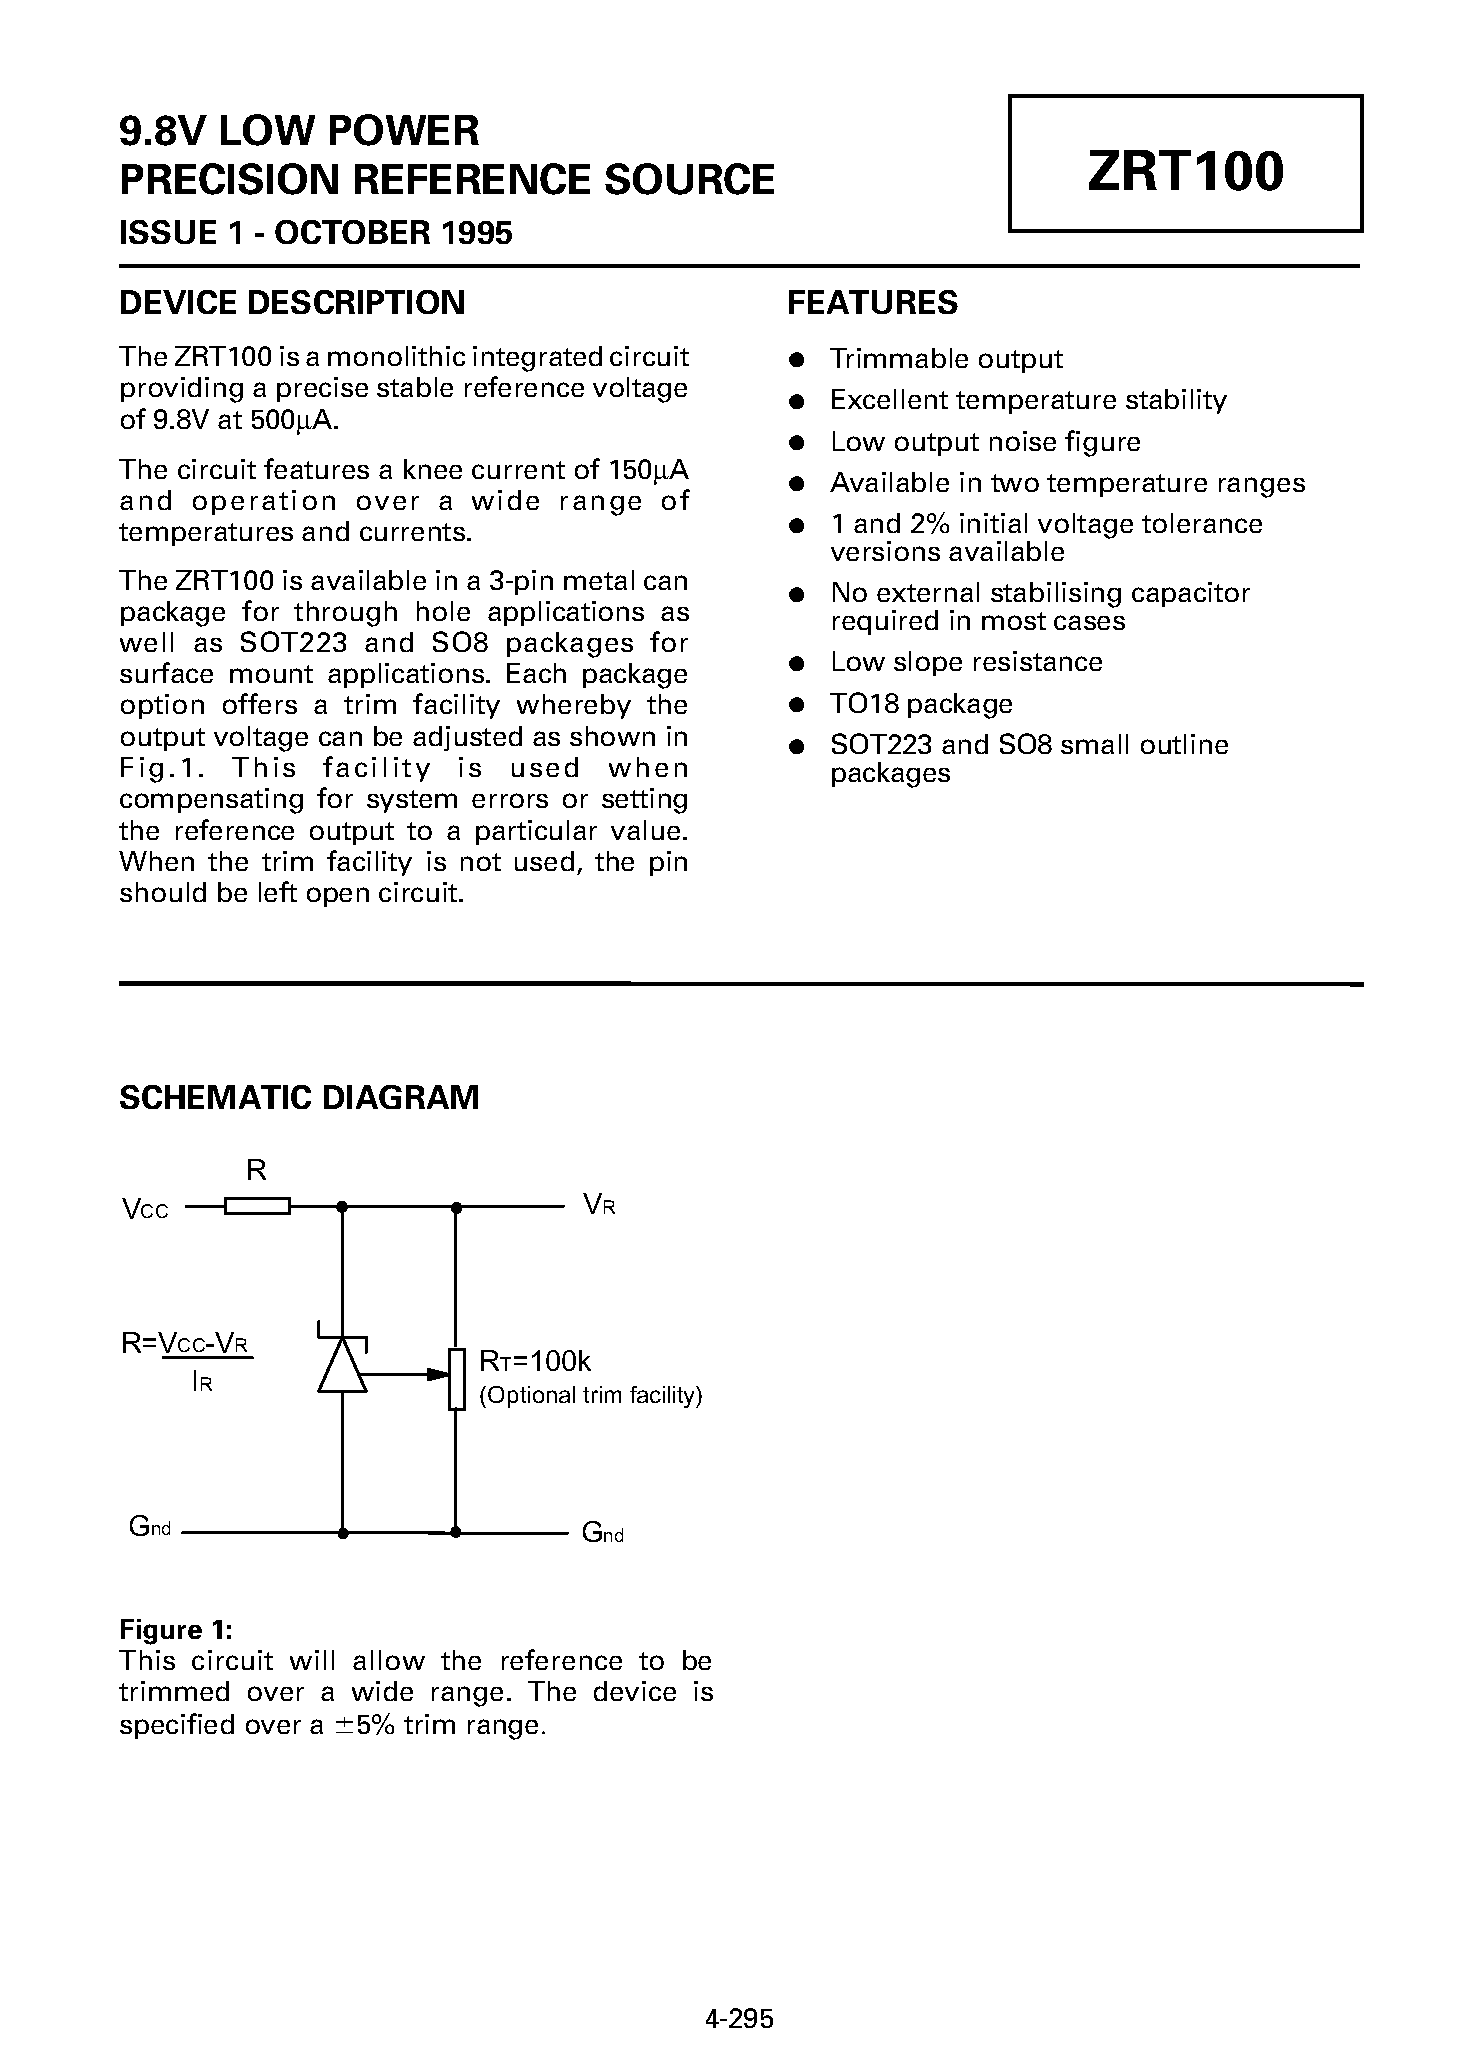 Datasheet ZRT100GA1 - 9.8V LOW POWER PRECISION REFERENCE SOURCE page 1